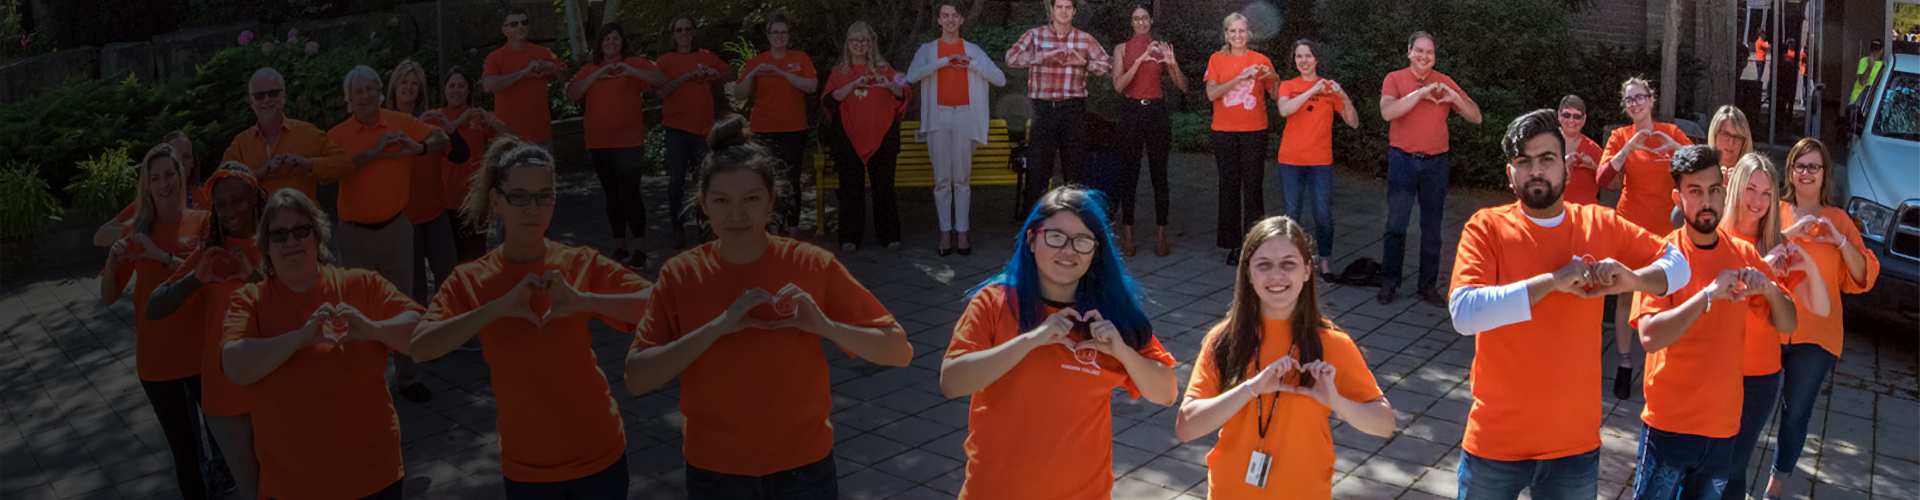 Indigenous students and allies in orange shirts standing in a circle